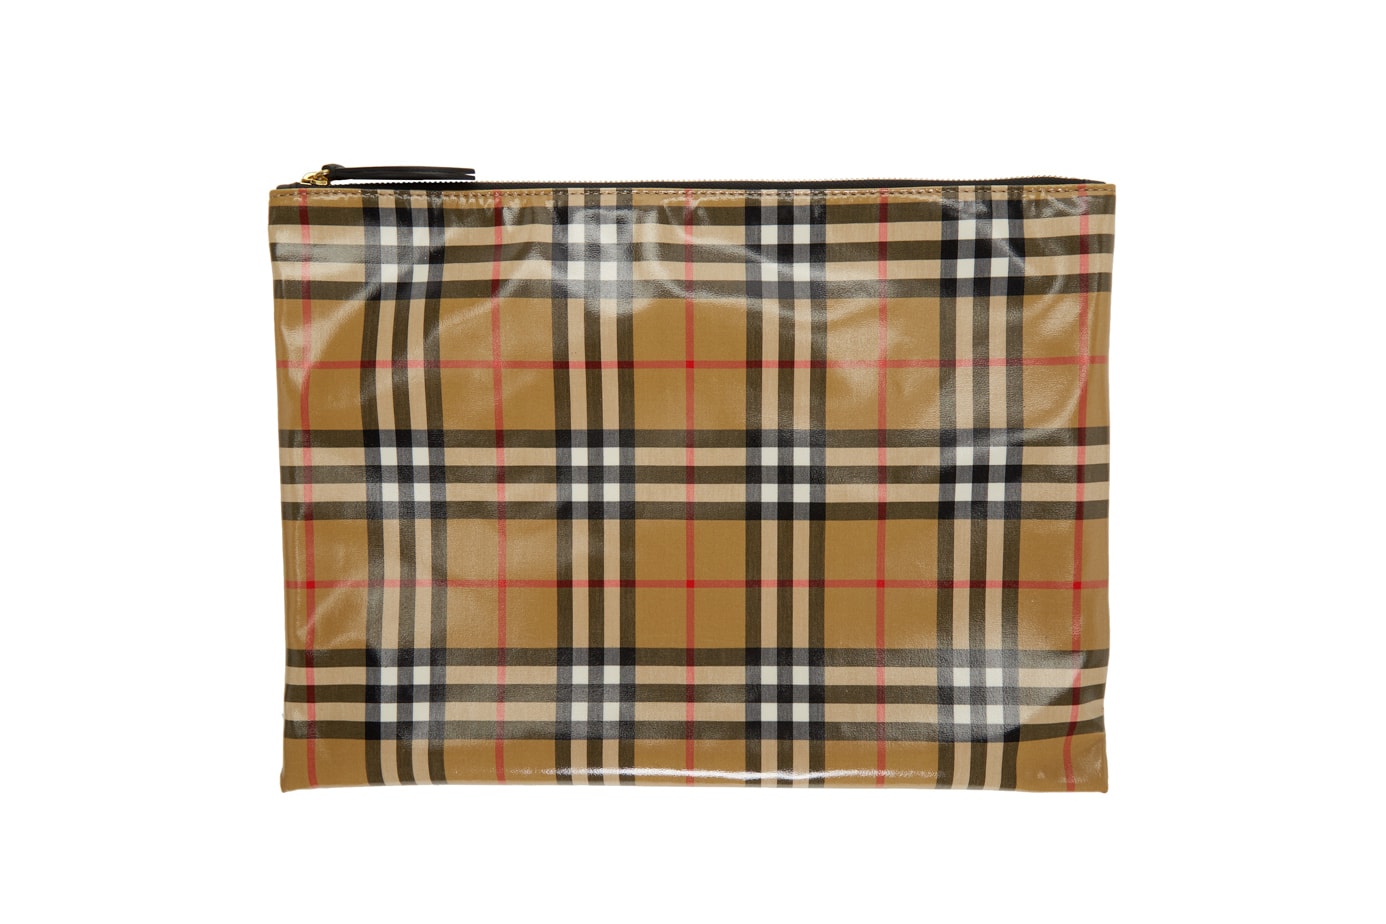 Burberry Coated Leather Signature Check Pouch Nova Check Heritage Check Pattern Beige Red White Black